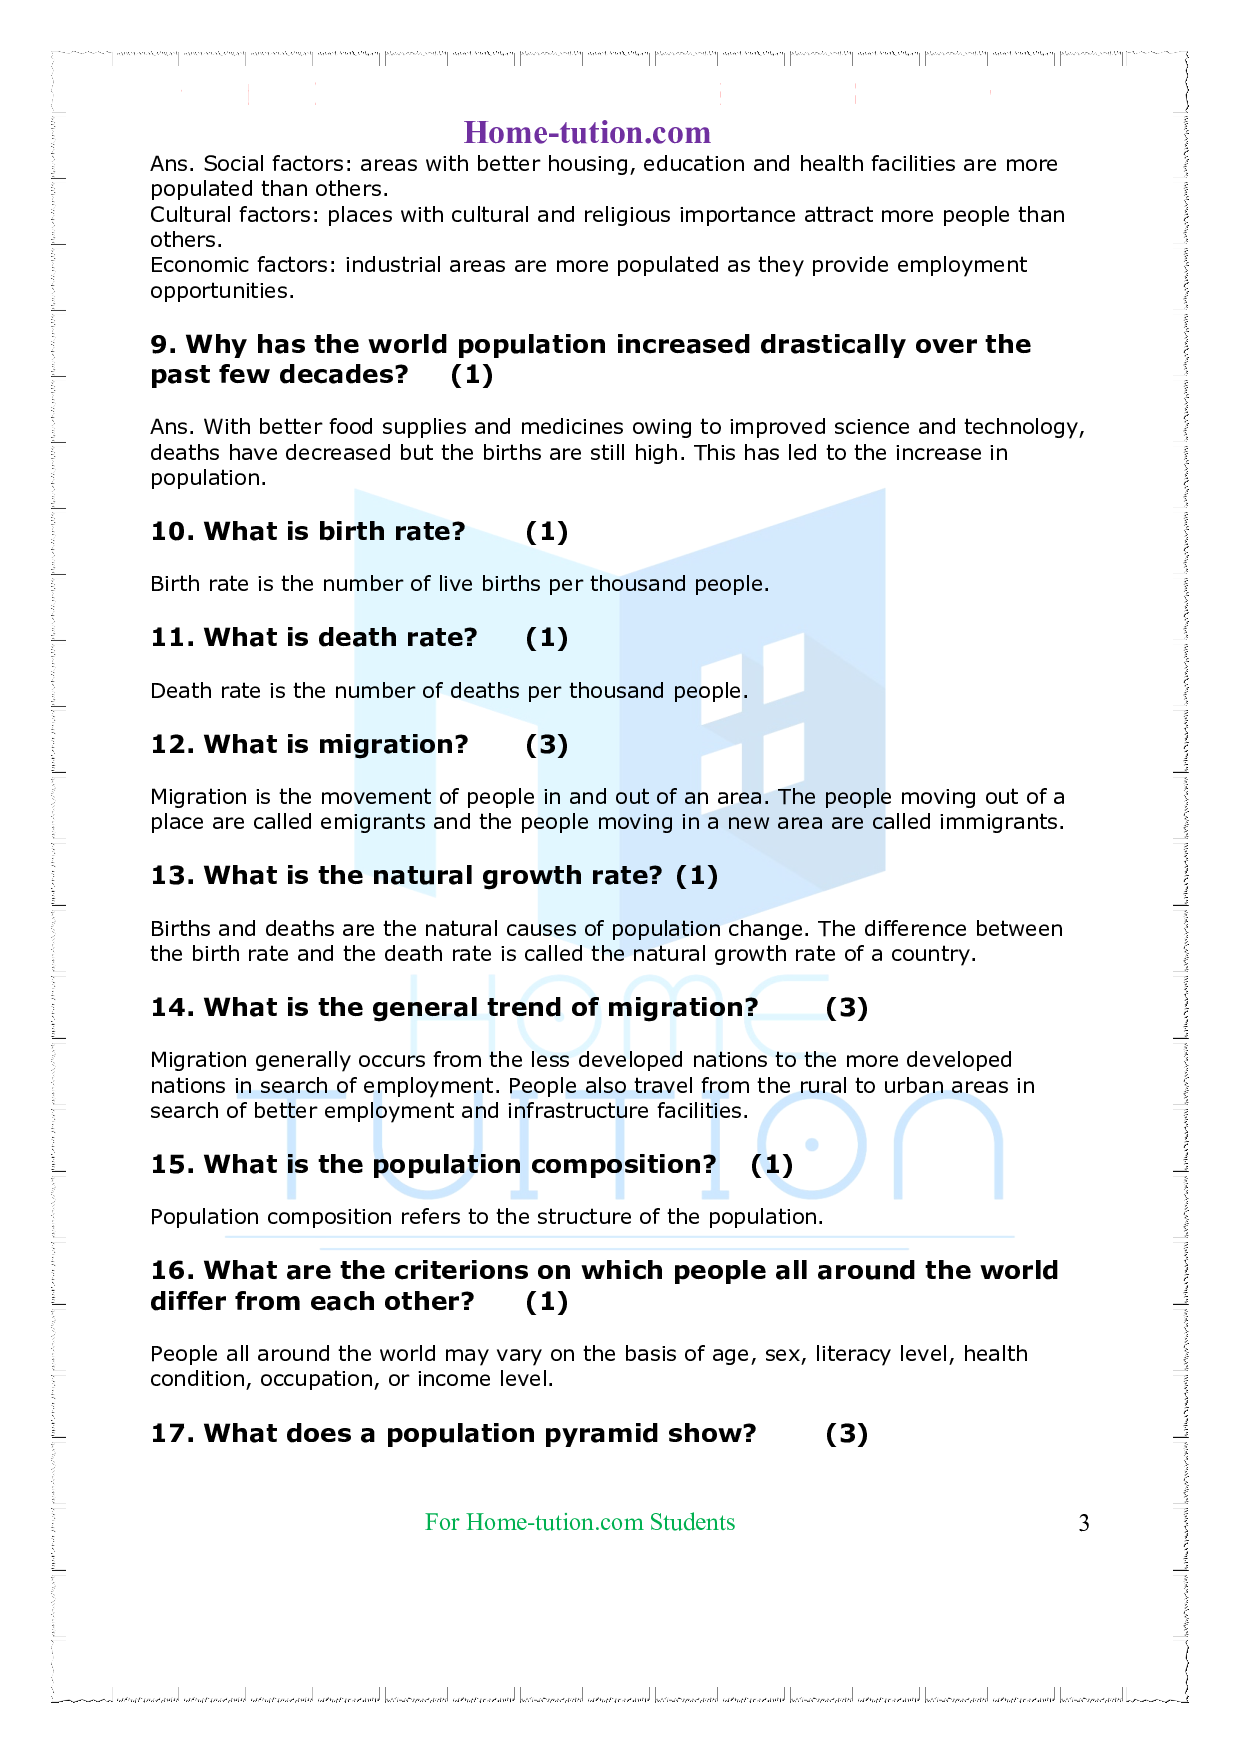 Important Questions on Class 8 Geography Chapter 6 Human Resources